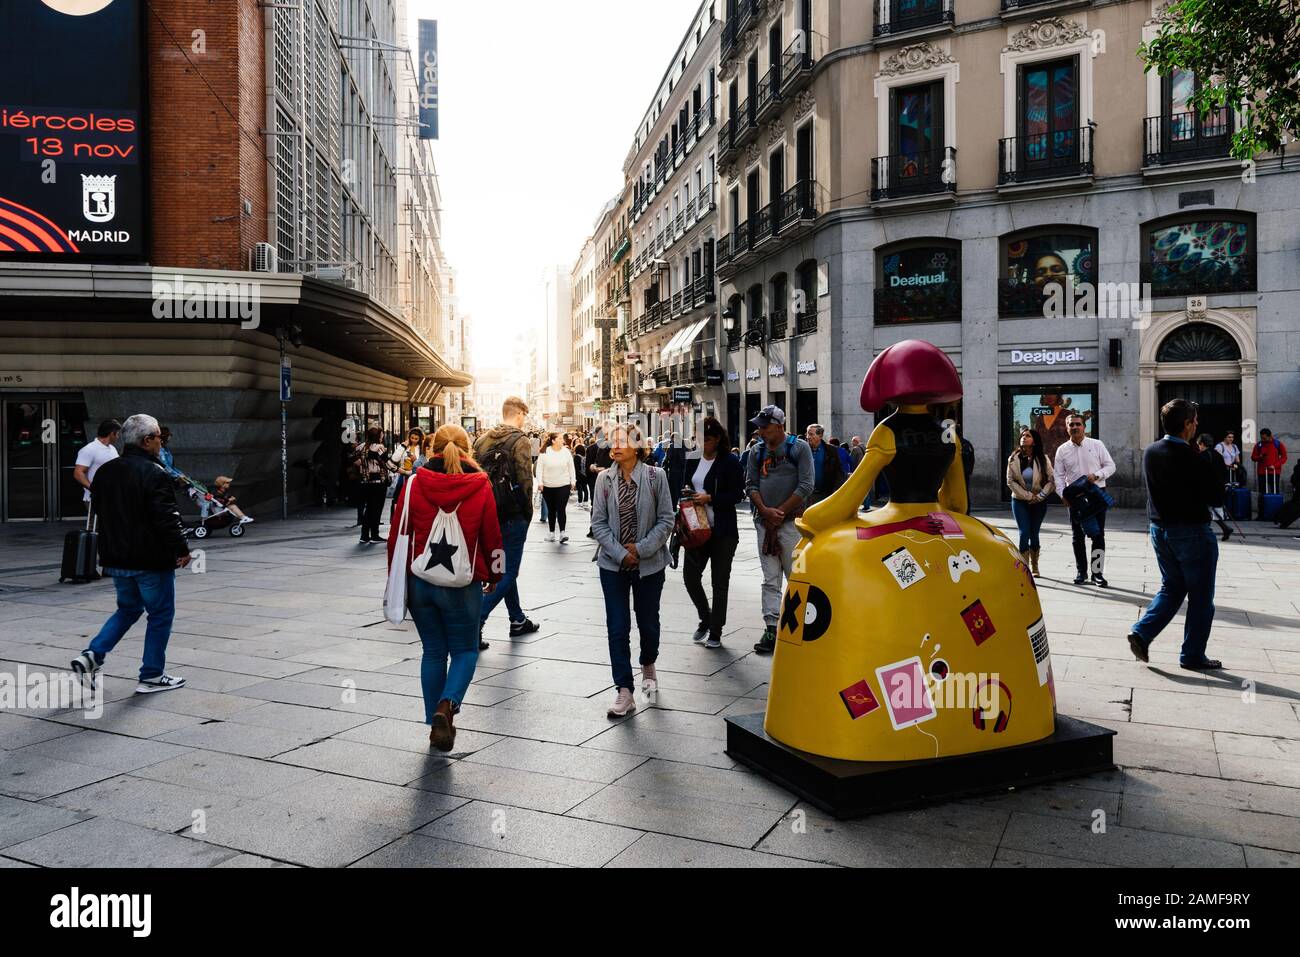 Madrid, Spain - November 1, 2019: People in Callao Square and Preciados commercial street with sun flare on background. Madrid, Spain Stock Photo